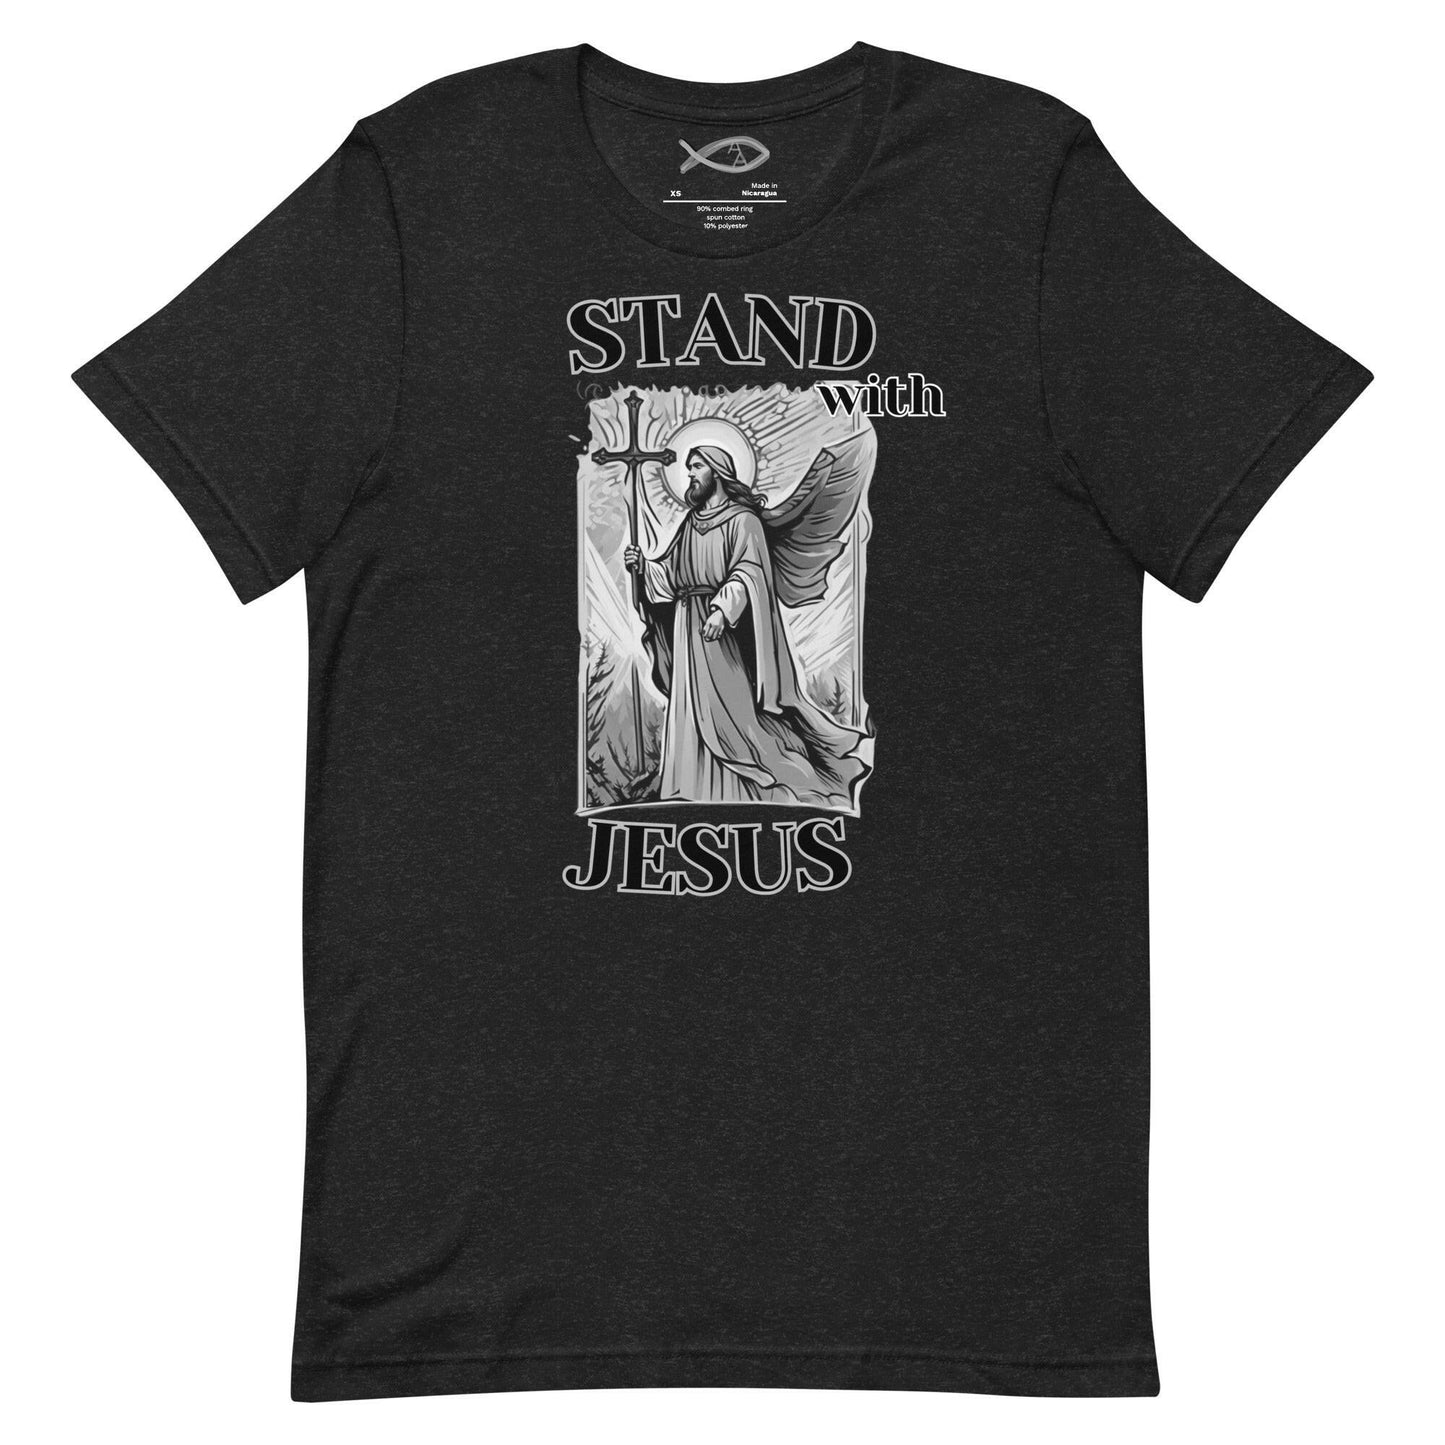 Stand with Jesus - Unisex T-shirt